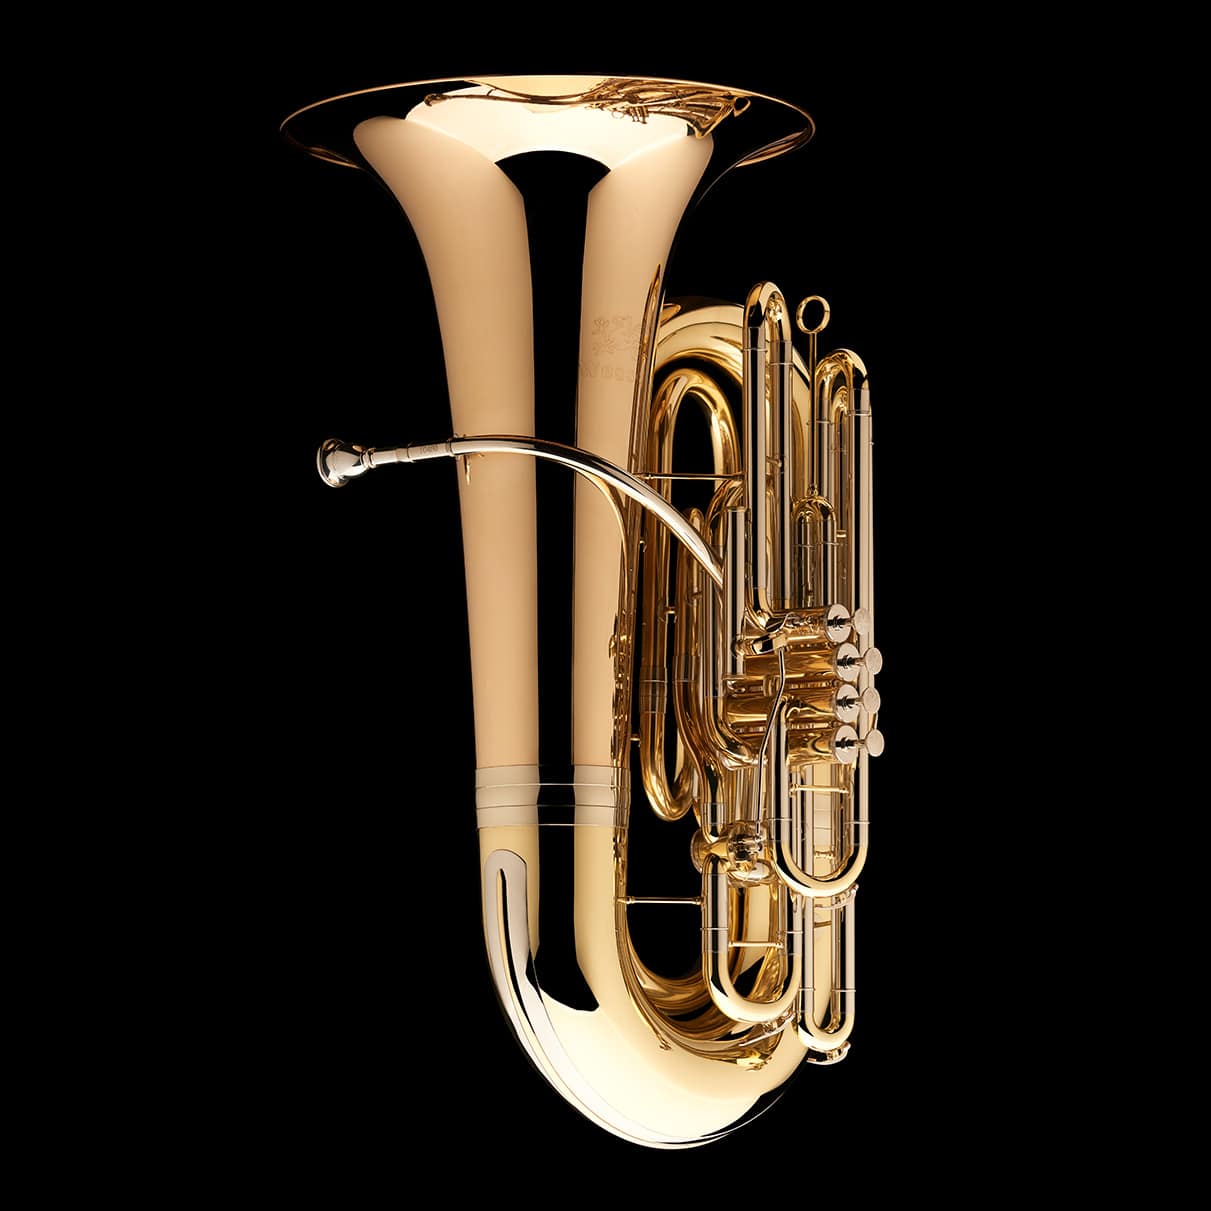 An alternative image of a BBb 4/4 Tuba with 5-valves 'Viverna' from Wessex Tubas